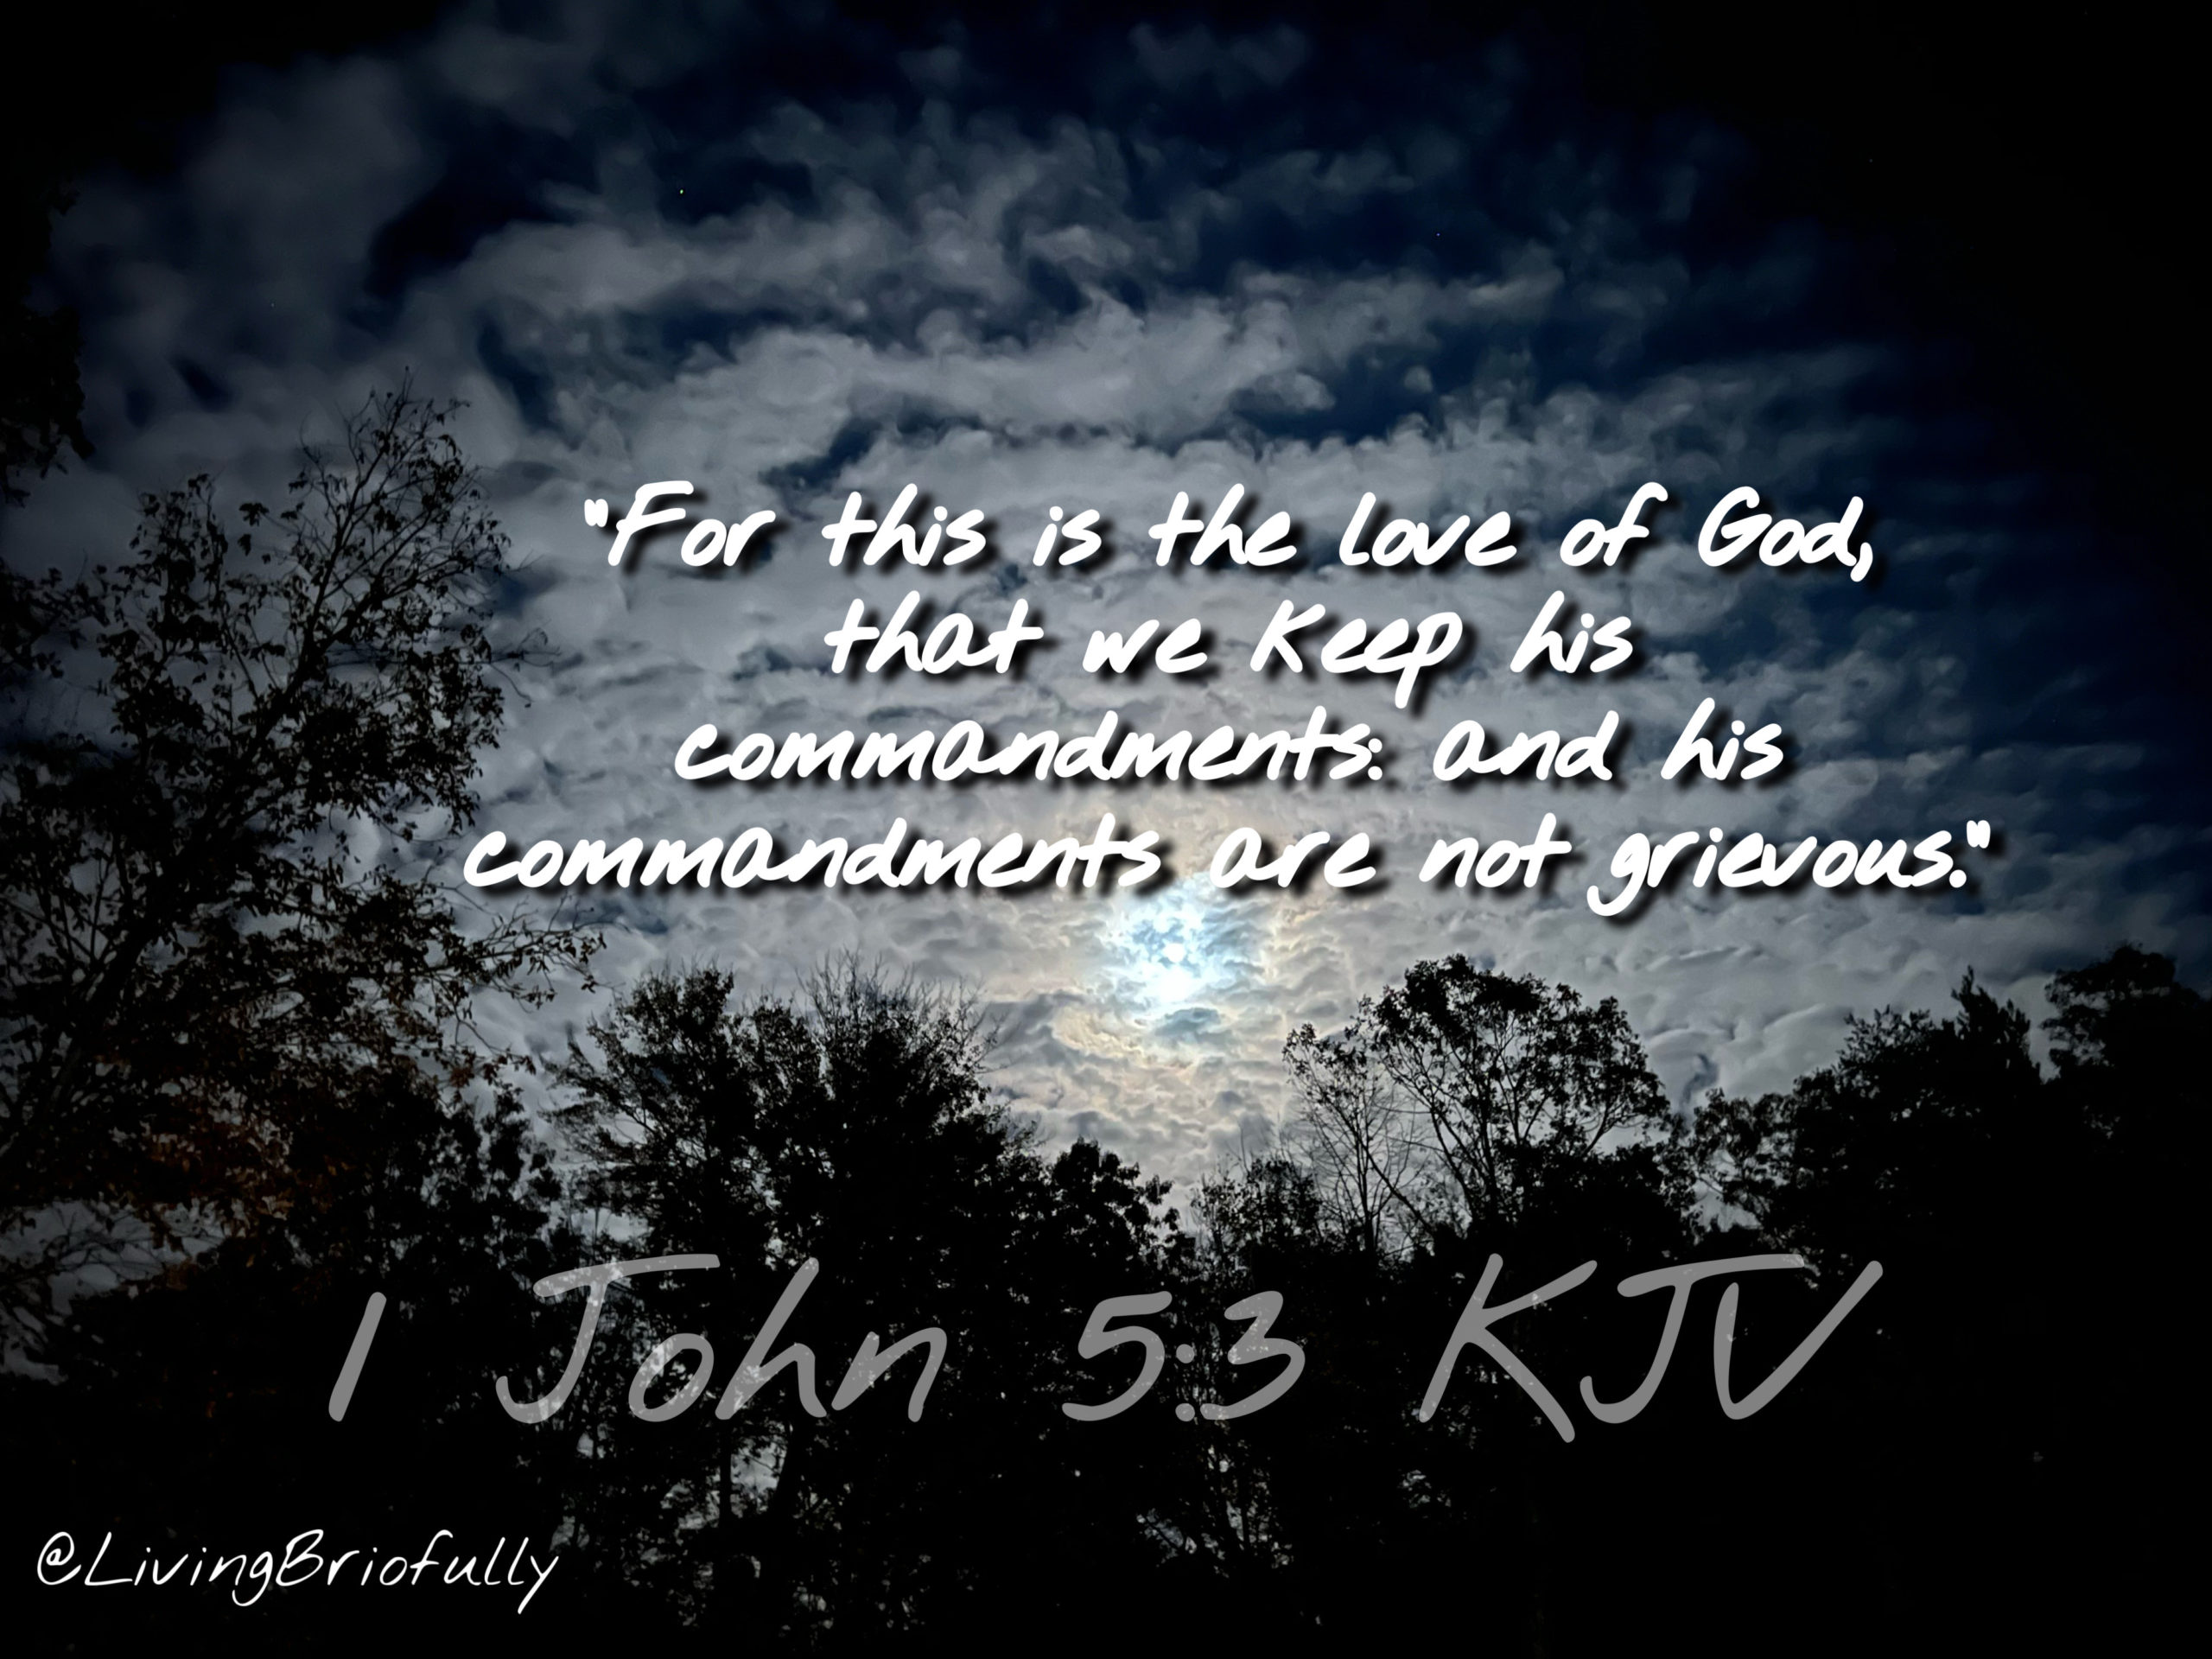 "For this is the love of God, that we keep his commandments: and his commandments are not grievous." 1 John 5:3